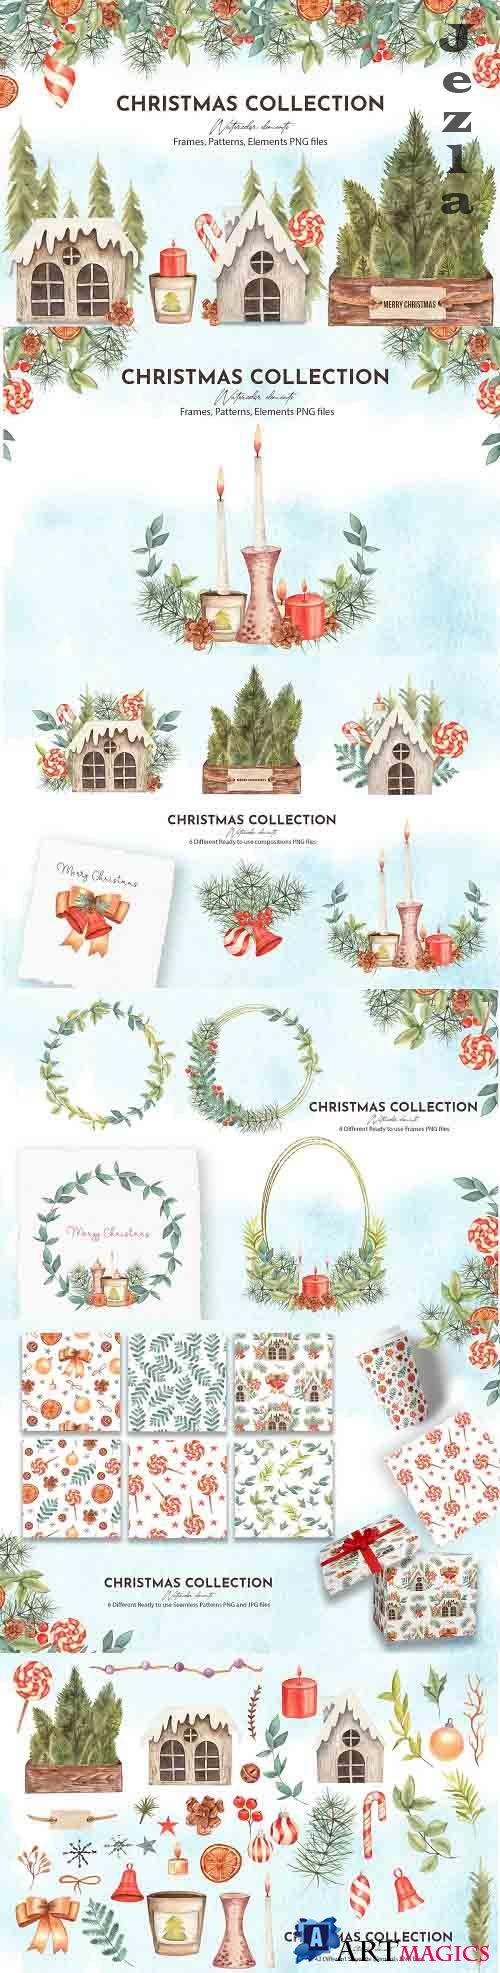 Watercolor Christmas Collection - 5635772